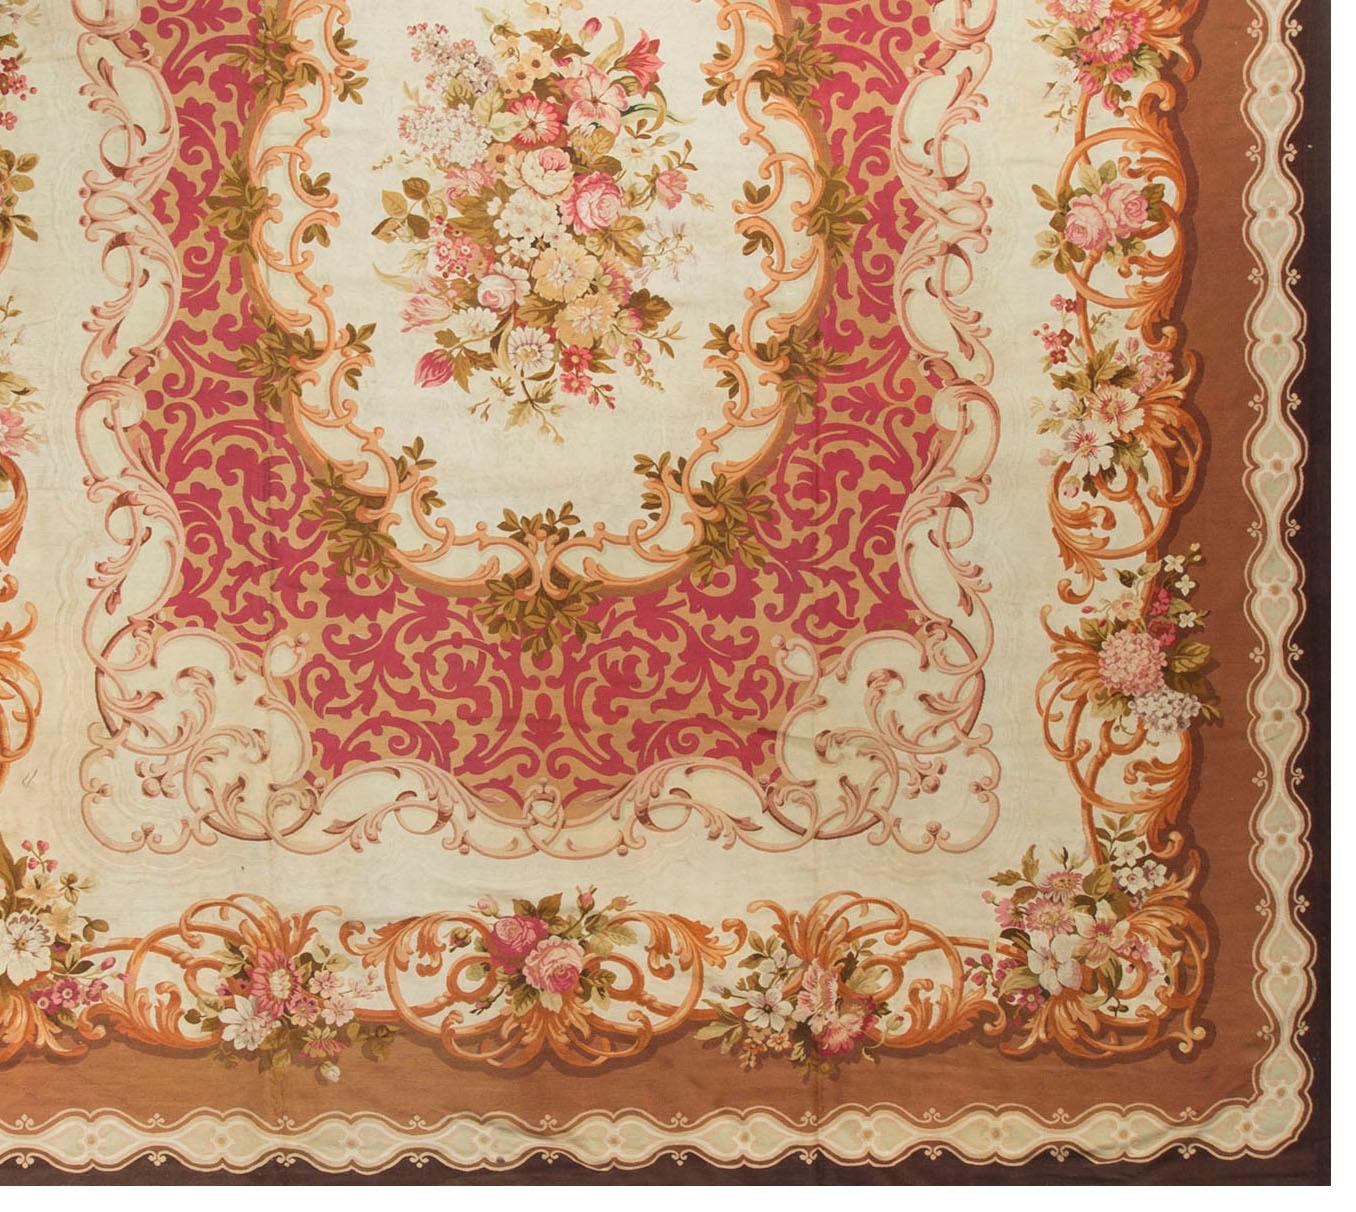 Antique French Aubusson rug carpet, circa 1890 13'4 x 16'6. Typical French Aubusson design, with the central ivory medallion surrounded by a rose colored swirl, full of gold leaf stems, this itself enclosed in an ivory field with a floral motif on